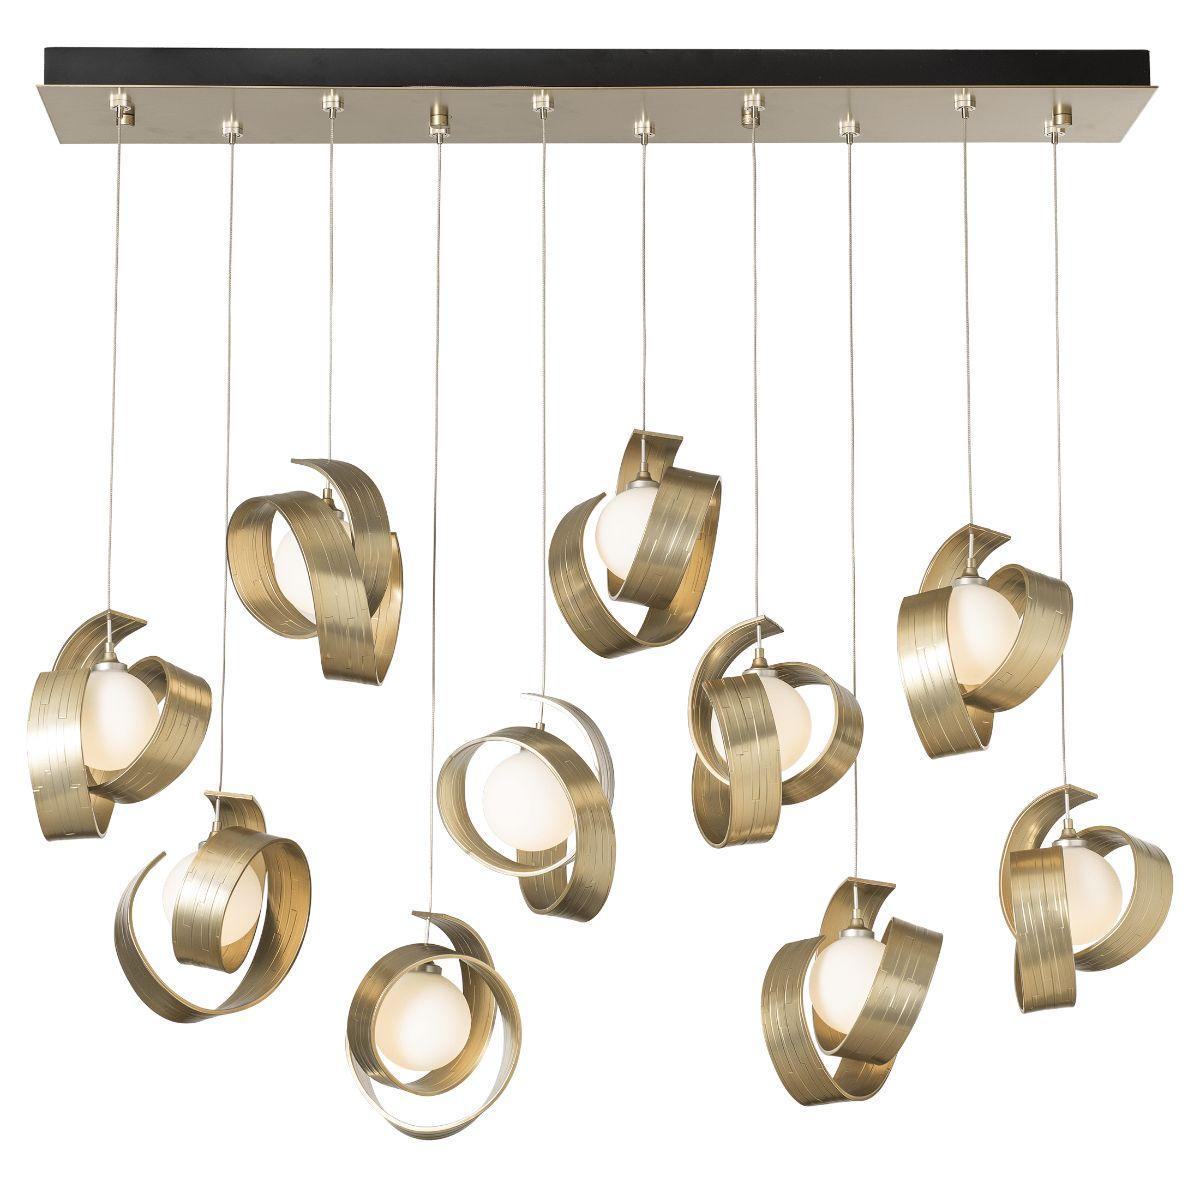 Riza 47 in. 10 lights Linear Pendant Light with Long Height